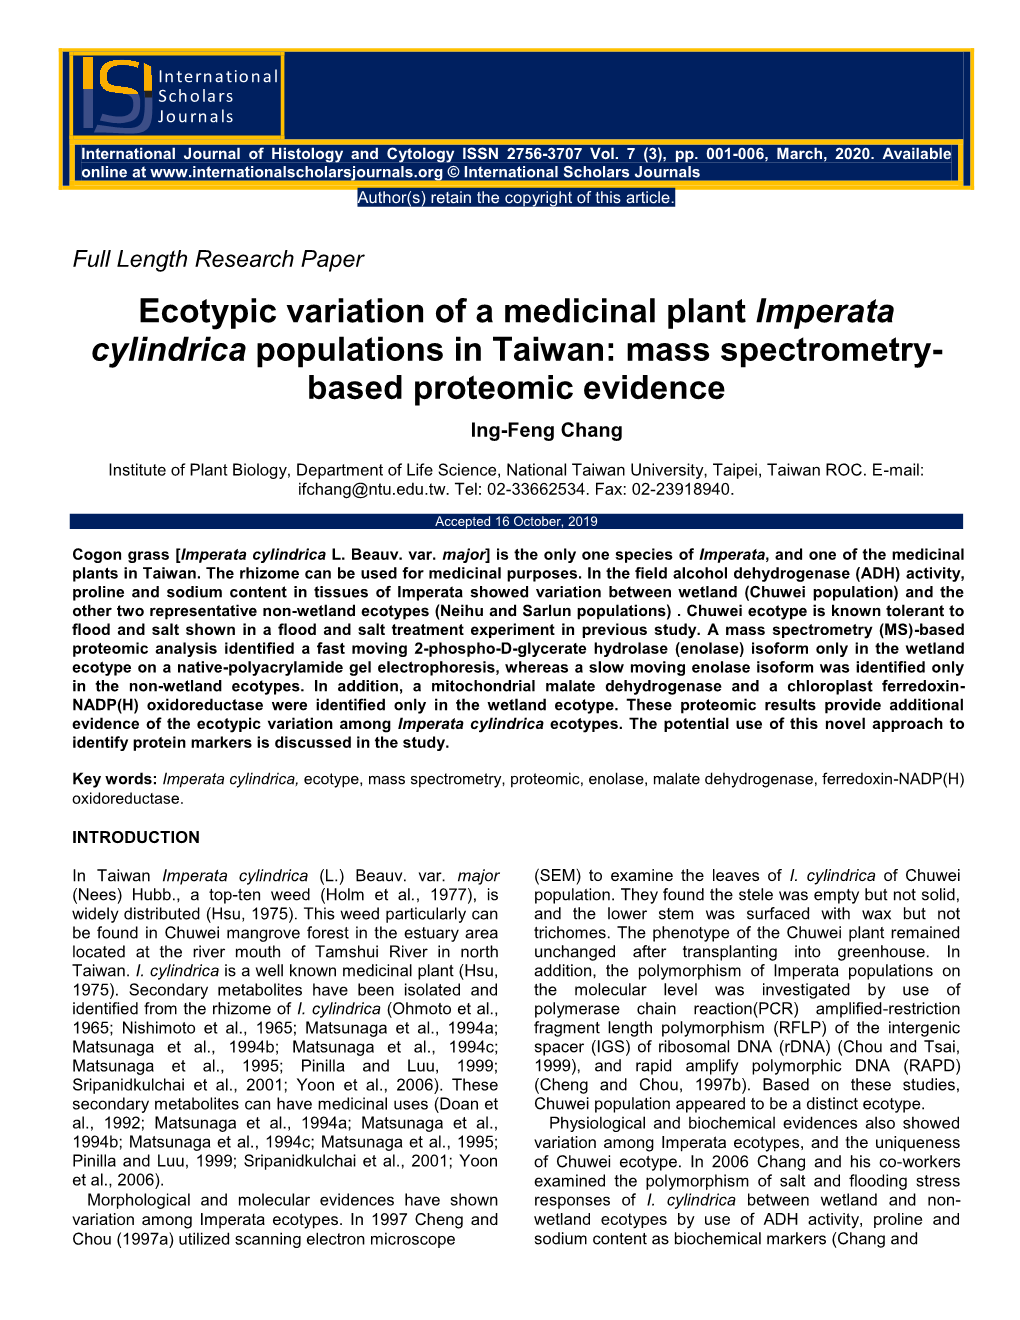 Ecotypic Variation of a Medicinal Plant Imperata Cylindrica Populations in Taiwan: Mass Spectrometry- Based Proteomic Evidence